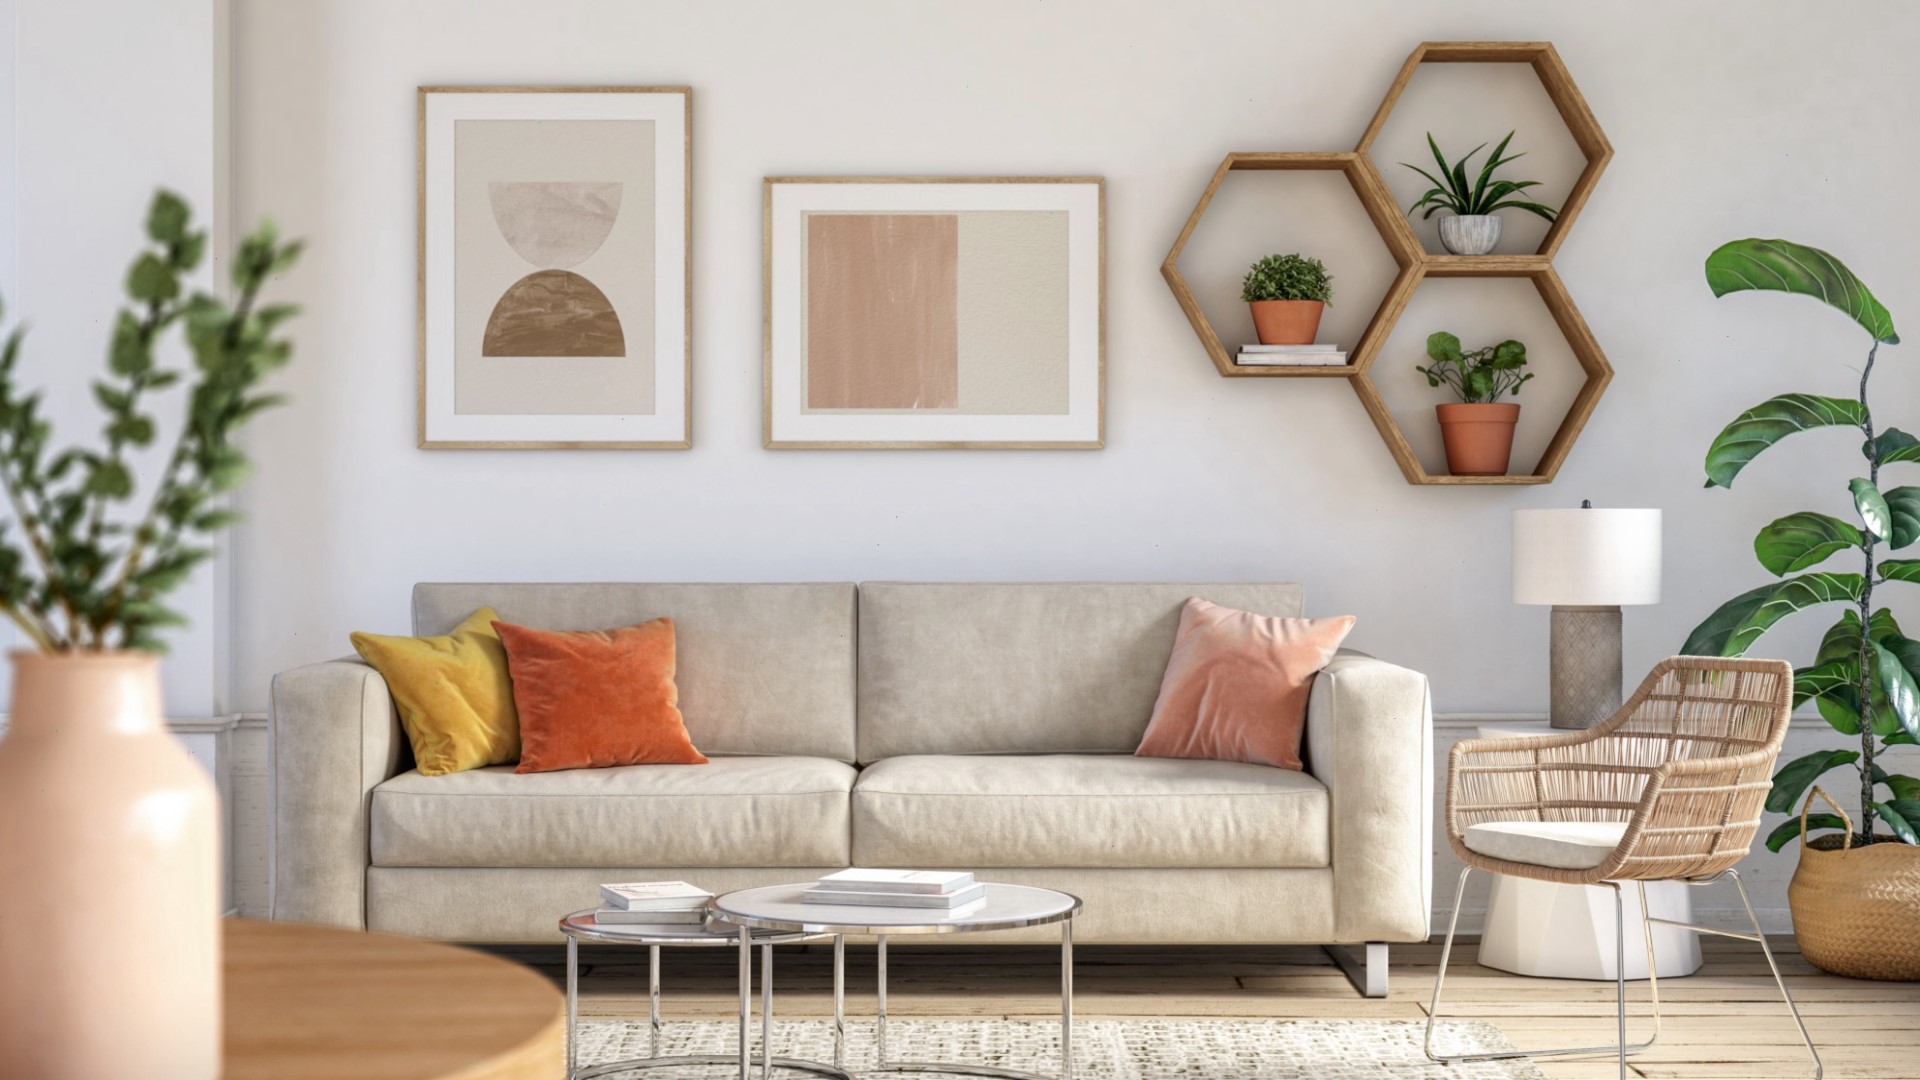 A new study commissioned by Article and conducted by OnePoll found that your zodiac sign can tell you a lot about what kind of home decor style you're likely to choose. Buzz60's Johana Restrepo has more.